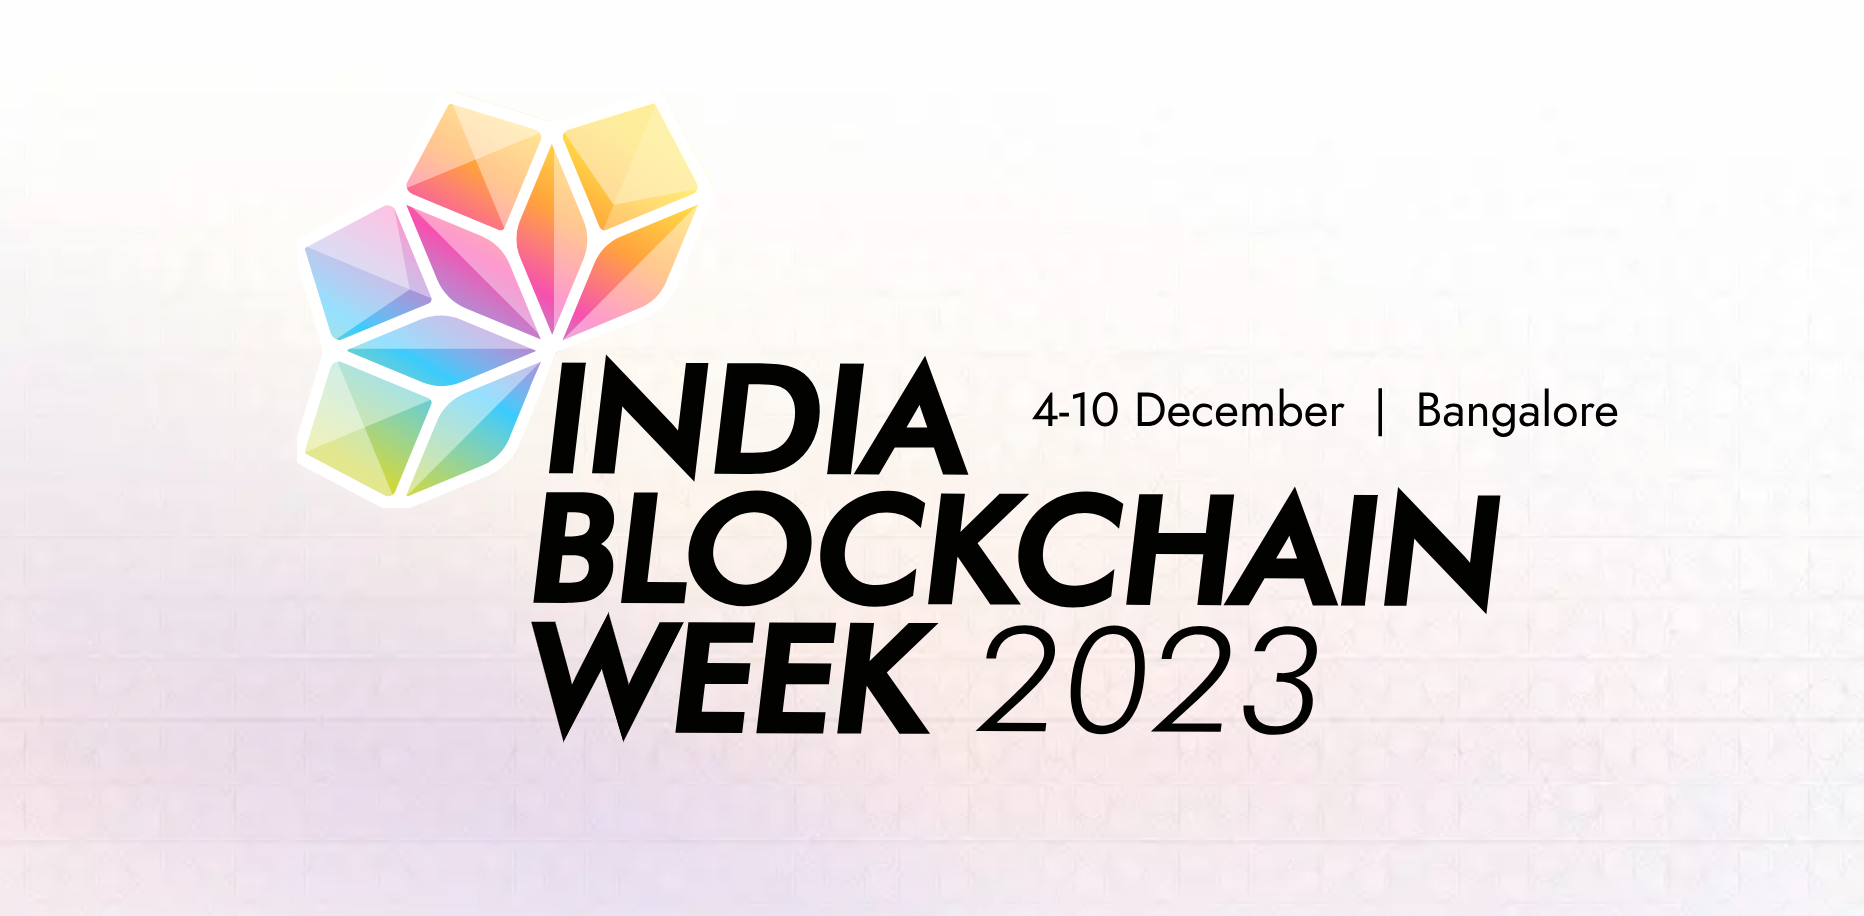 India Blockchain Week 2023: Unveiling Dynamic Lineup for Flagship Conference